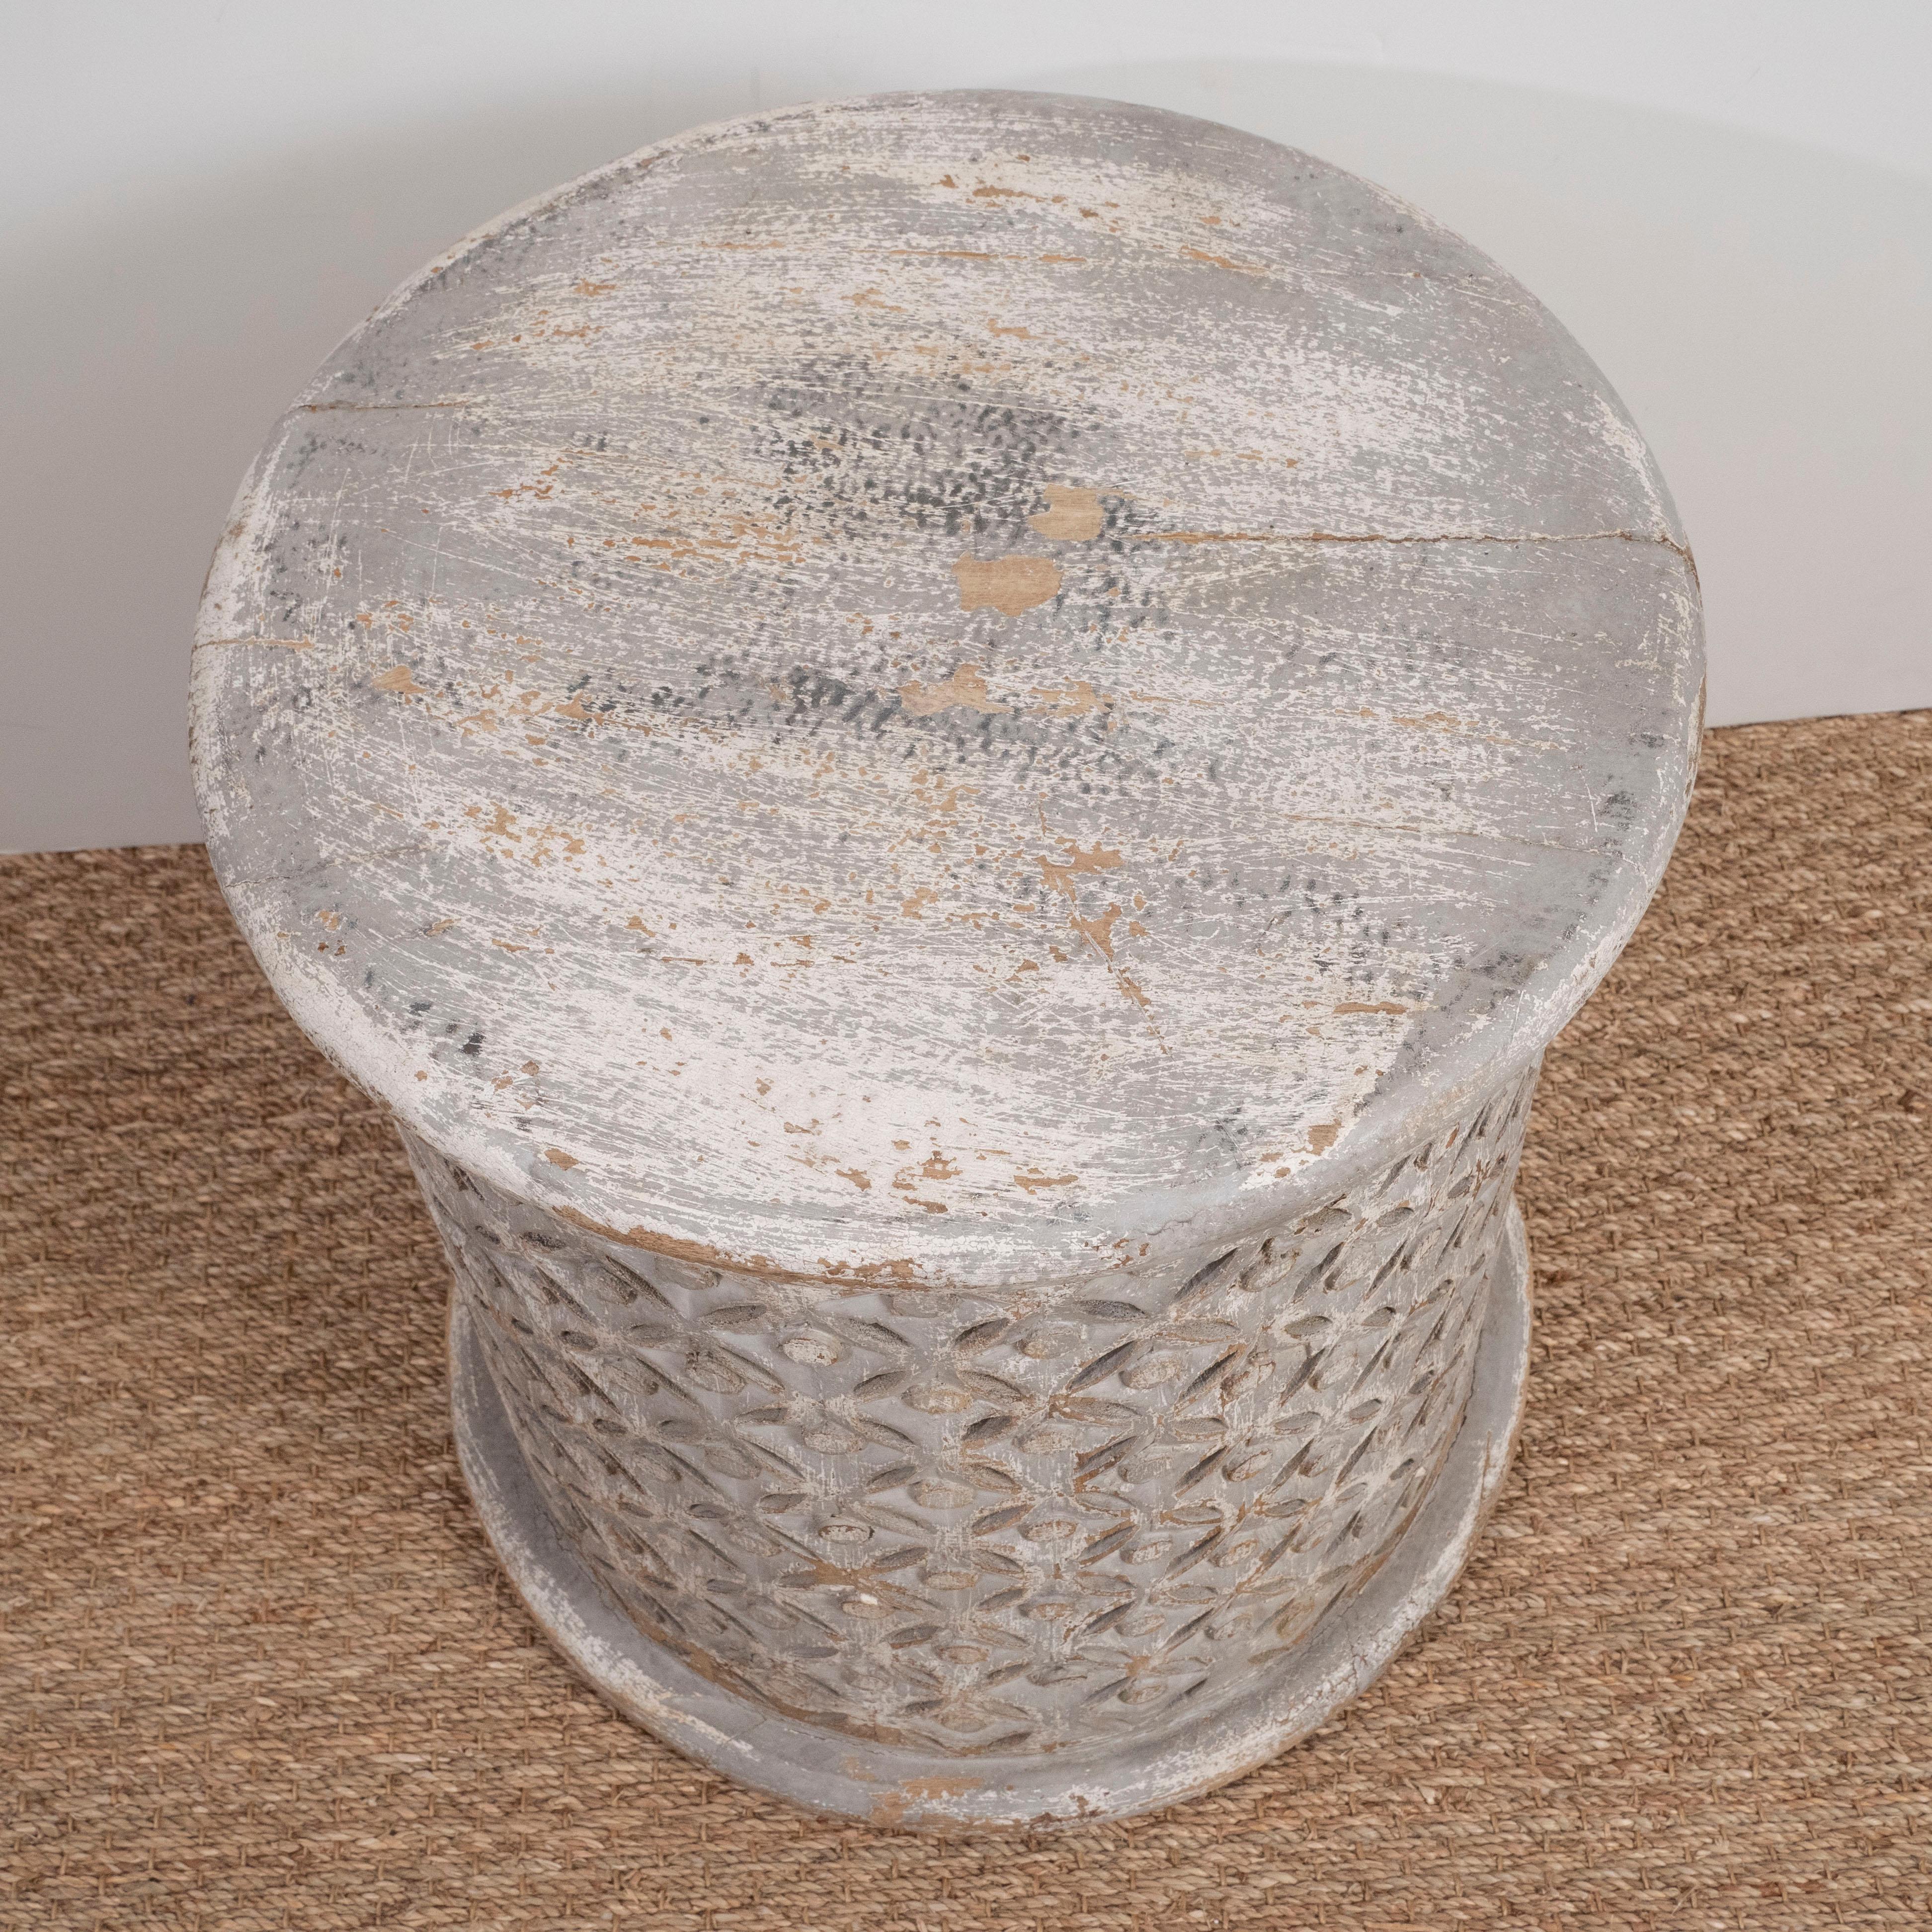 These round wooden garden stools are complete in a grey washed finish and patterned carving. Perfect for a casual room or beach house.